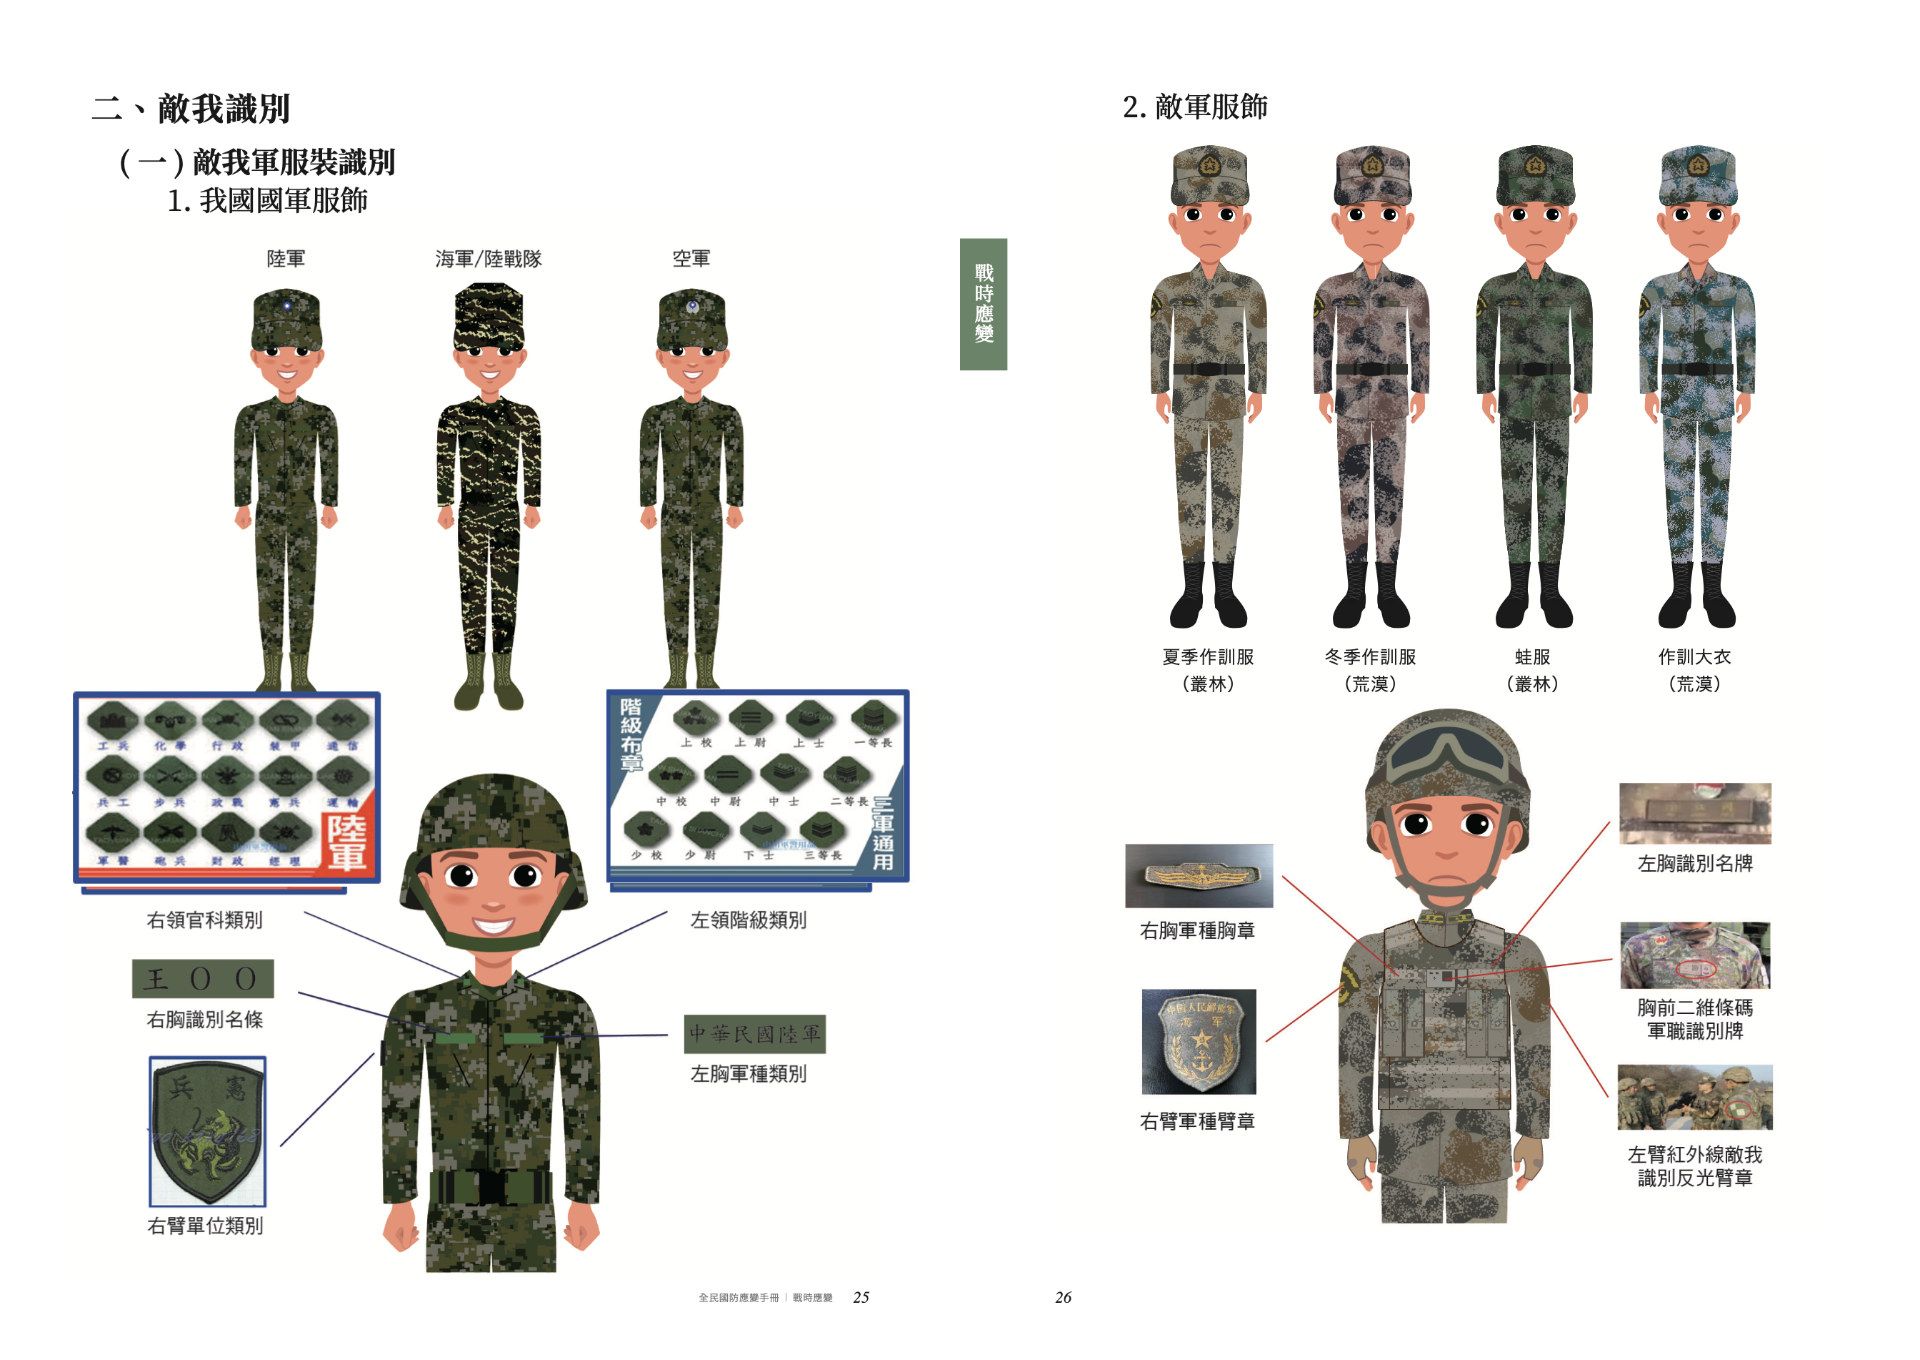 Screenshot of pages 25 and 26 of the 2023 Taiwan Civil Defense Handbook. Page 25 (on the left) shows three variations of the Taiwanese soldier uniform, while page 26 (on the right), shows four variations of the Chinese soldier uniform.